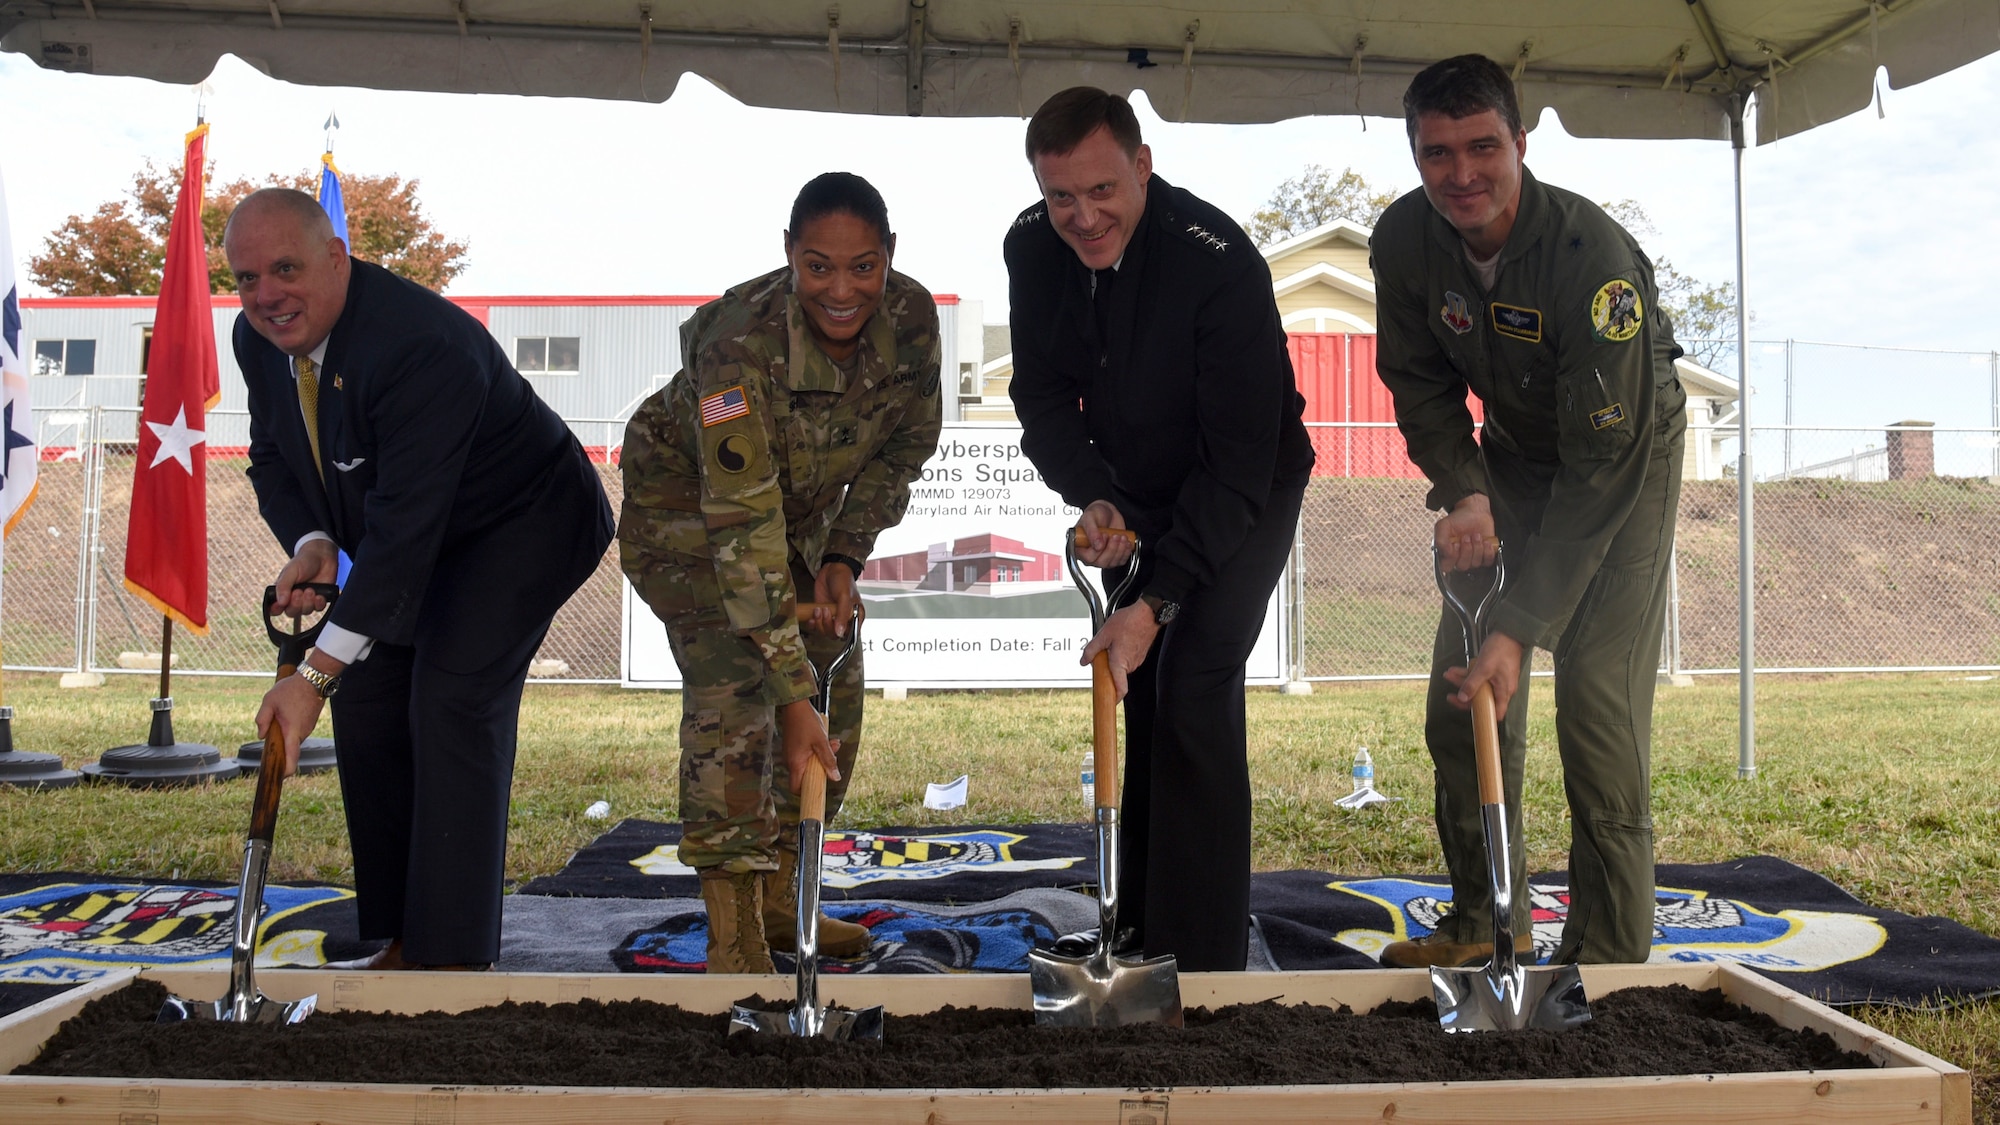 Maryland Gov. Larry Hogan, Maj. Gen. Linda Singh, the adjutant general of Maryland, Admiral Michael Rogers, Commander of U.S. Cyber Command and Director of the National Security Agency, and Gen. Randolph Staudenraus, 175th Wing Commander, break ground for the 175th Cyberspace Operations Squadron new facility, Nov. 2, 2017 at Fort George G. Meade, Maryland. The new building will be a single-story, 9,000-square-foot facility providing operational and command space for missions supporting Maryland, the National Security Agency and the United States Cyber Command. (U.S. Air National Guard photo by Senior Airman Enjoli Saunders)